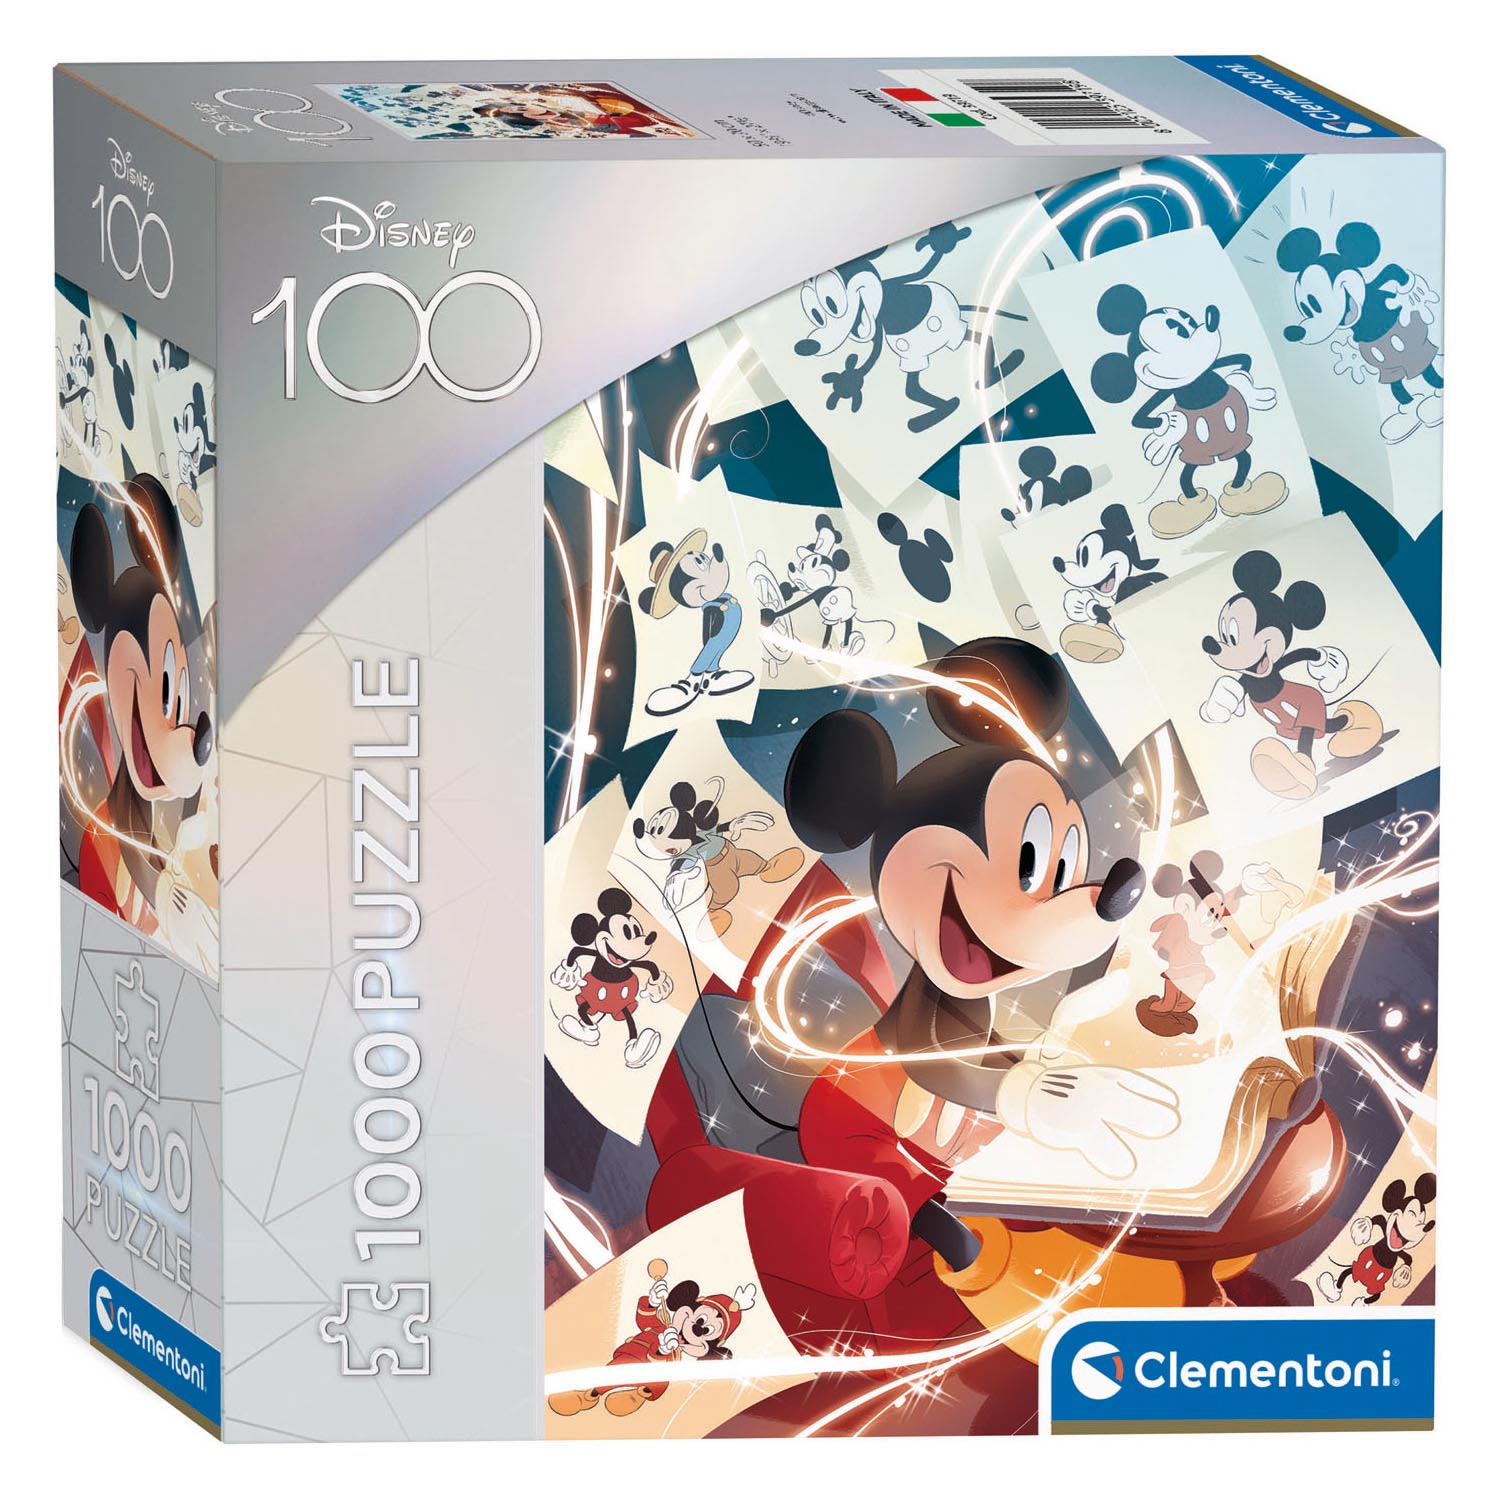 succes Somber Oude man Clementoni Puzzle Disney 100 Years - Mickey Mouse, 1000pcs. | Thimble Toys